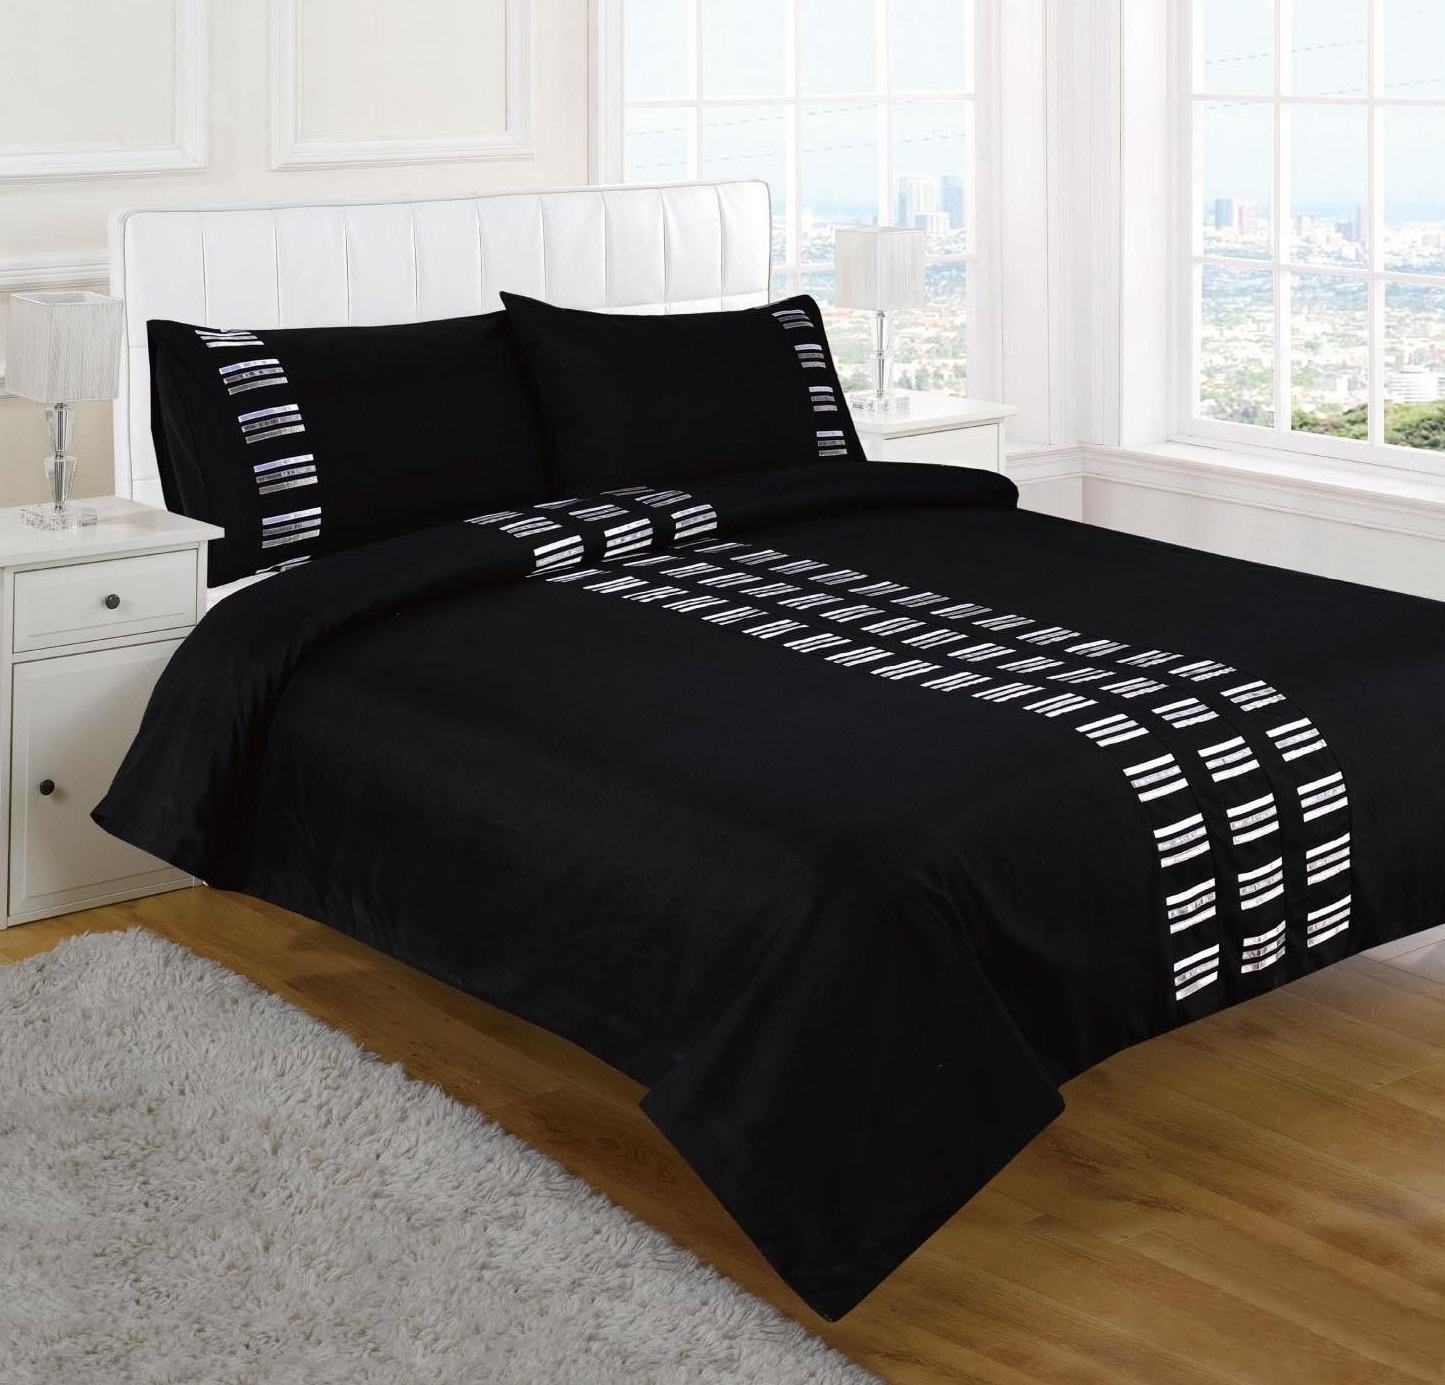 Black And Covers Terrific Black And White Duvet Covers In Renzo Cushion Cover Black Installed With White Nightstand And White Table Lamp On Wooden Floor Decoration Cozy Black And White Duvet Covers Collection For Comfortable Bedrooms